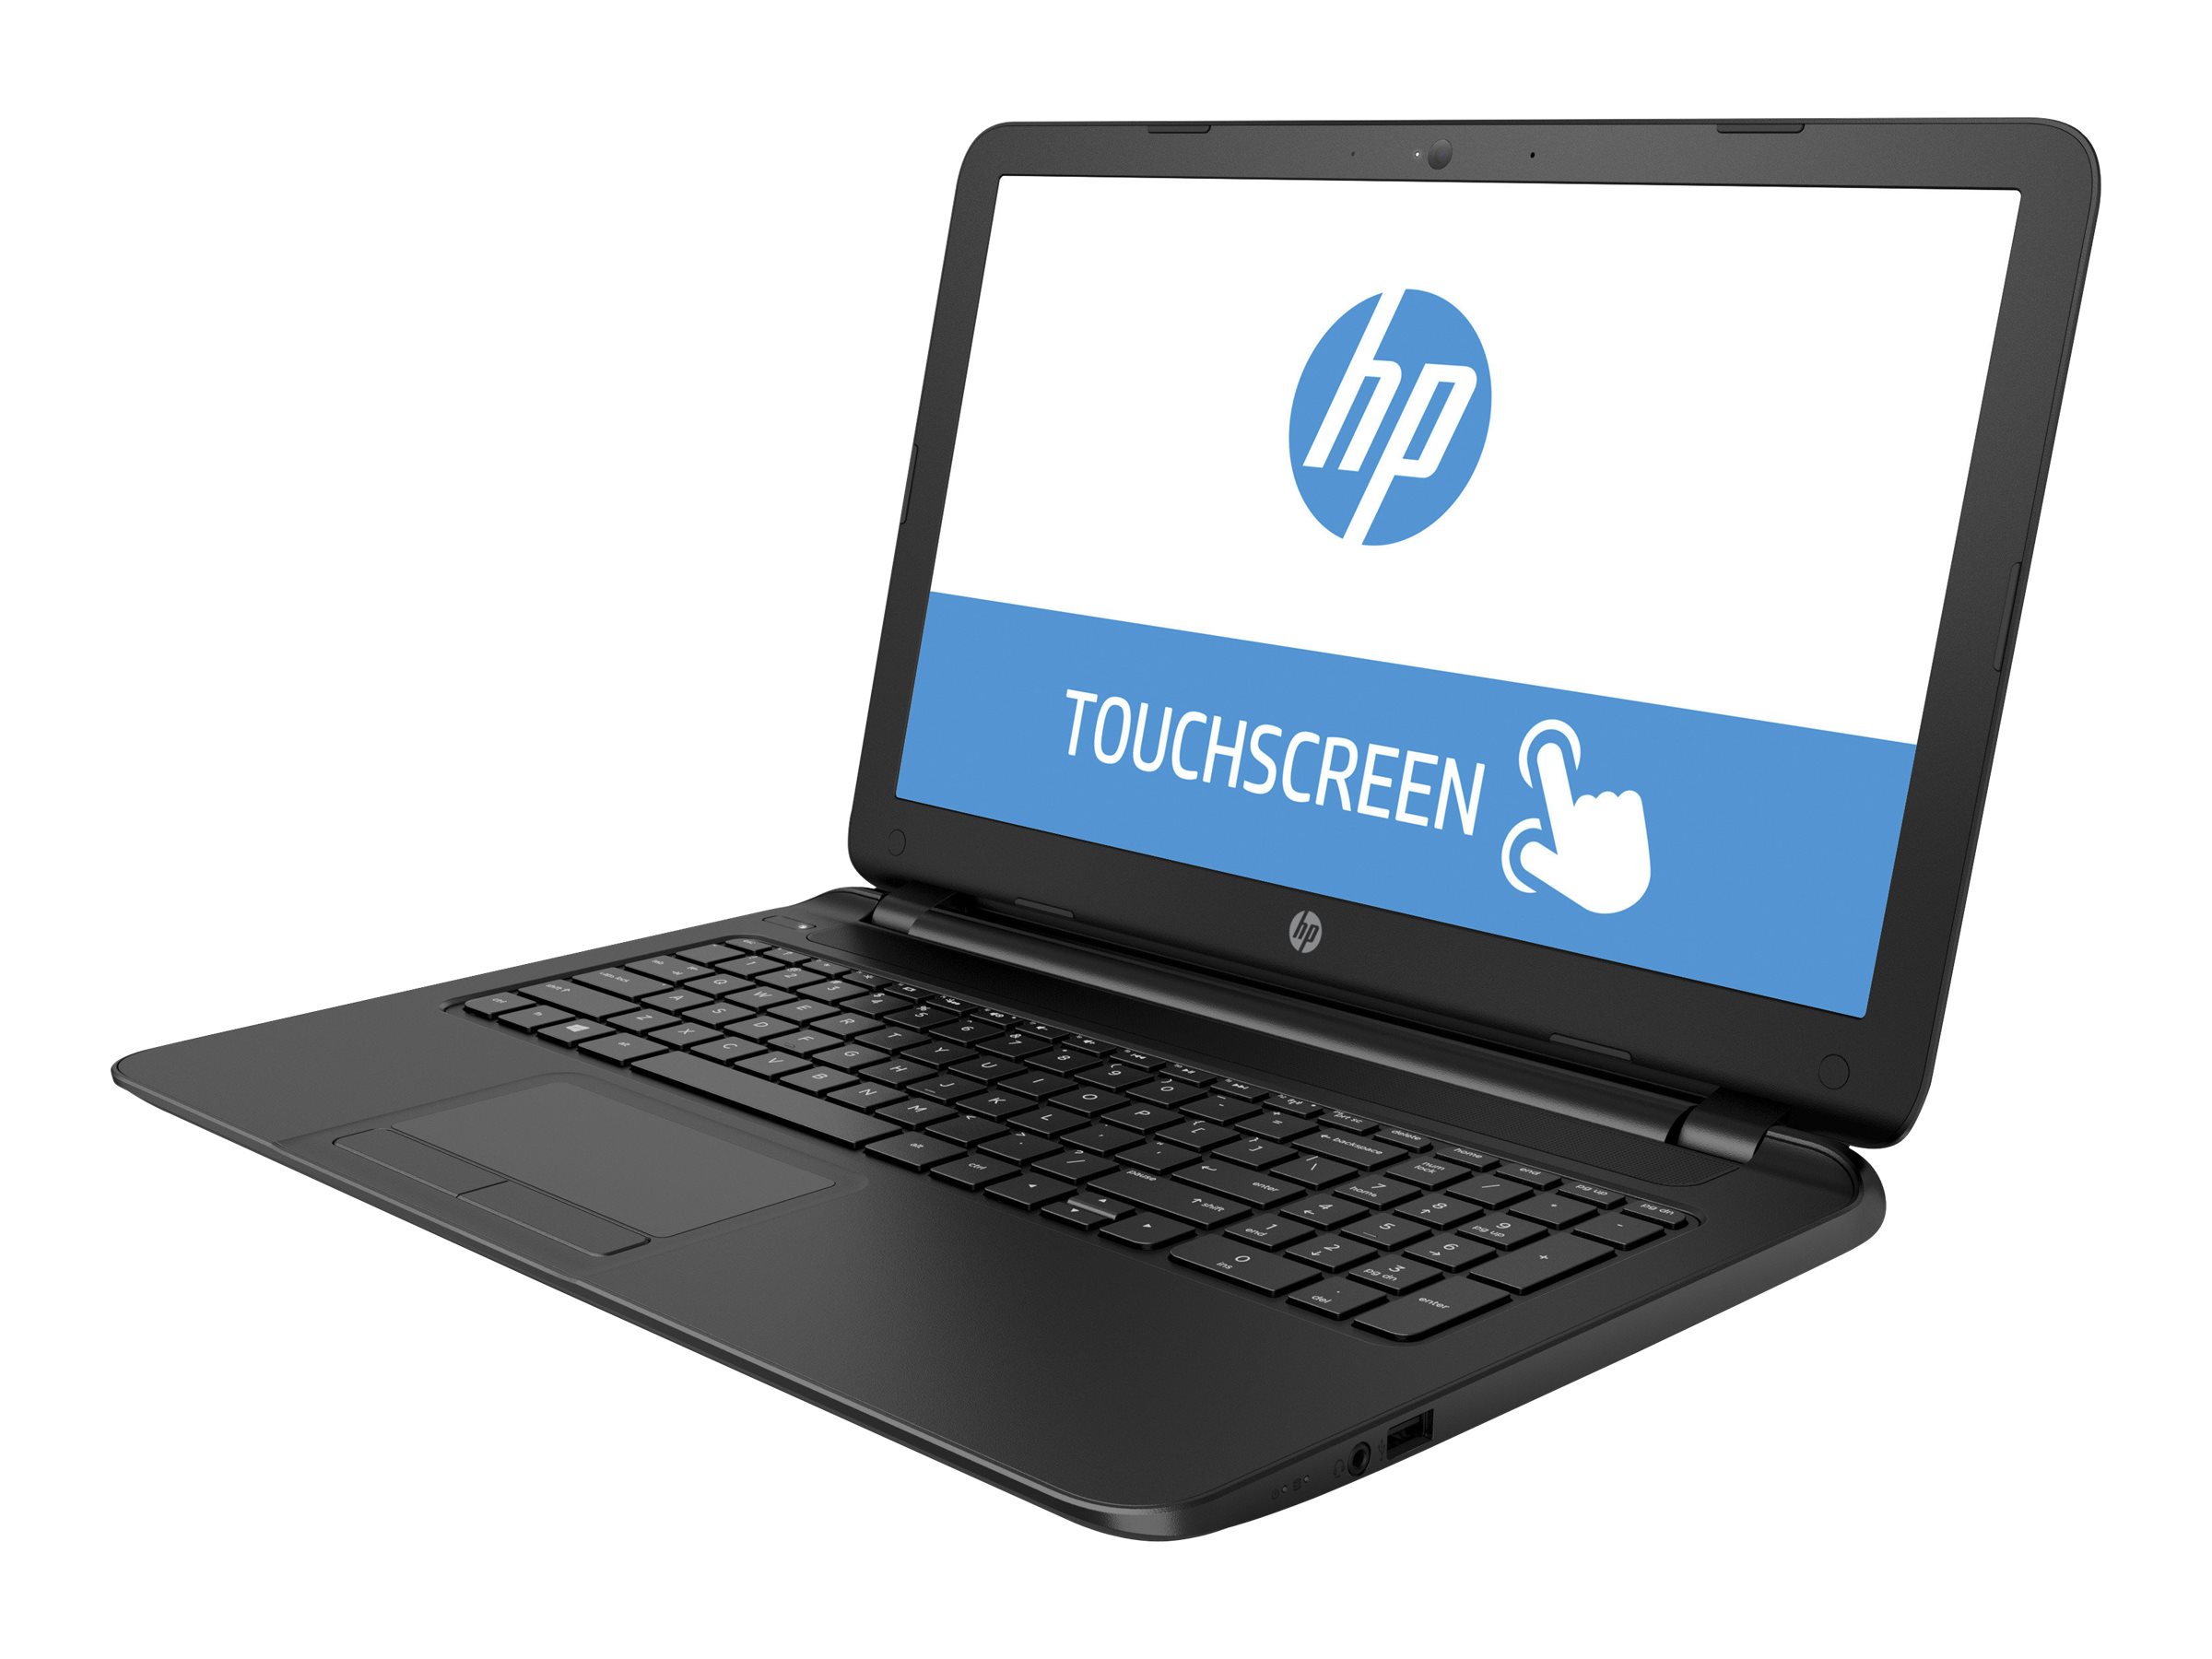 HP Black Licorice 15.6" 15-F387WM Laptop PC with AMD A8-7410 Processor, 4GB Memory, touch screen, 500GB Hard Drive and Windows 10 Home - image 5 of 41